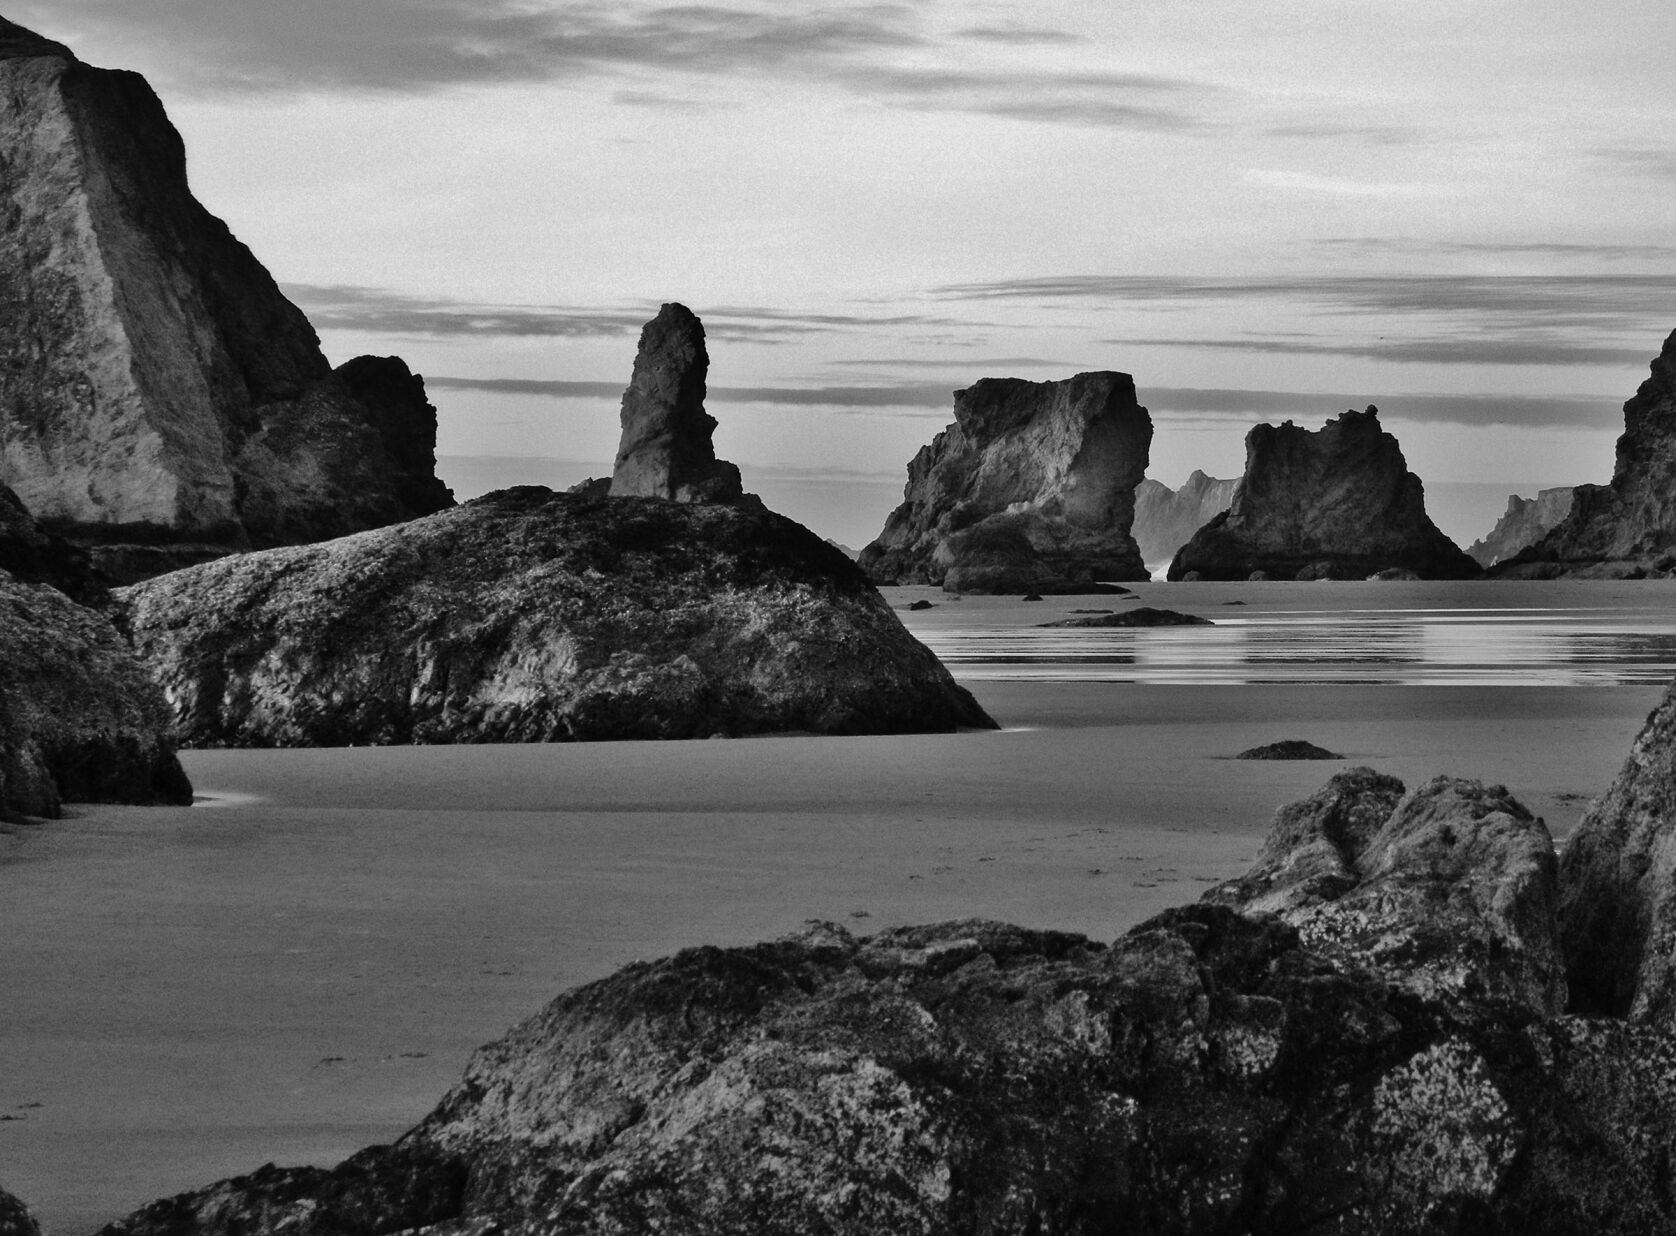 As I See It Scenery at the beach Bandon News theworldlink